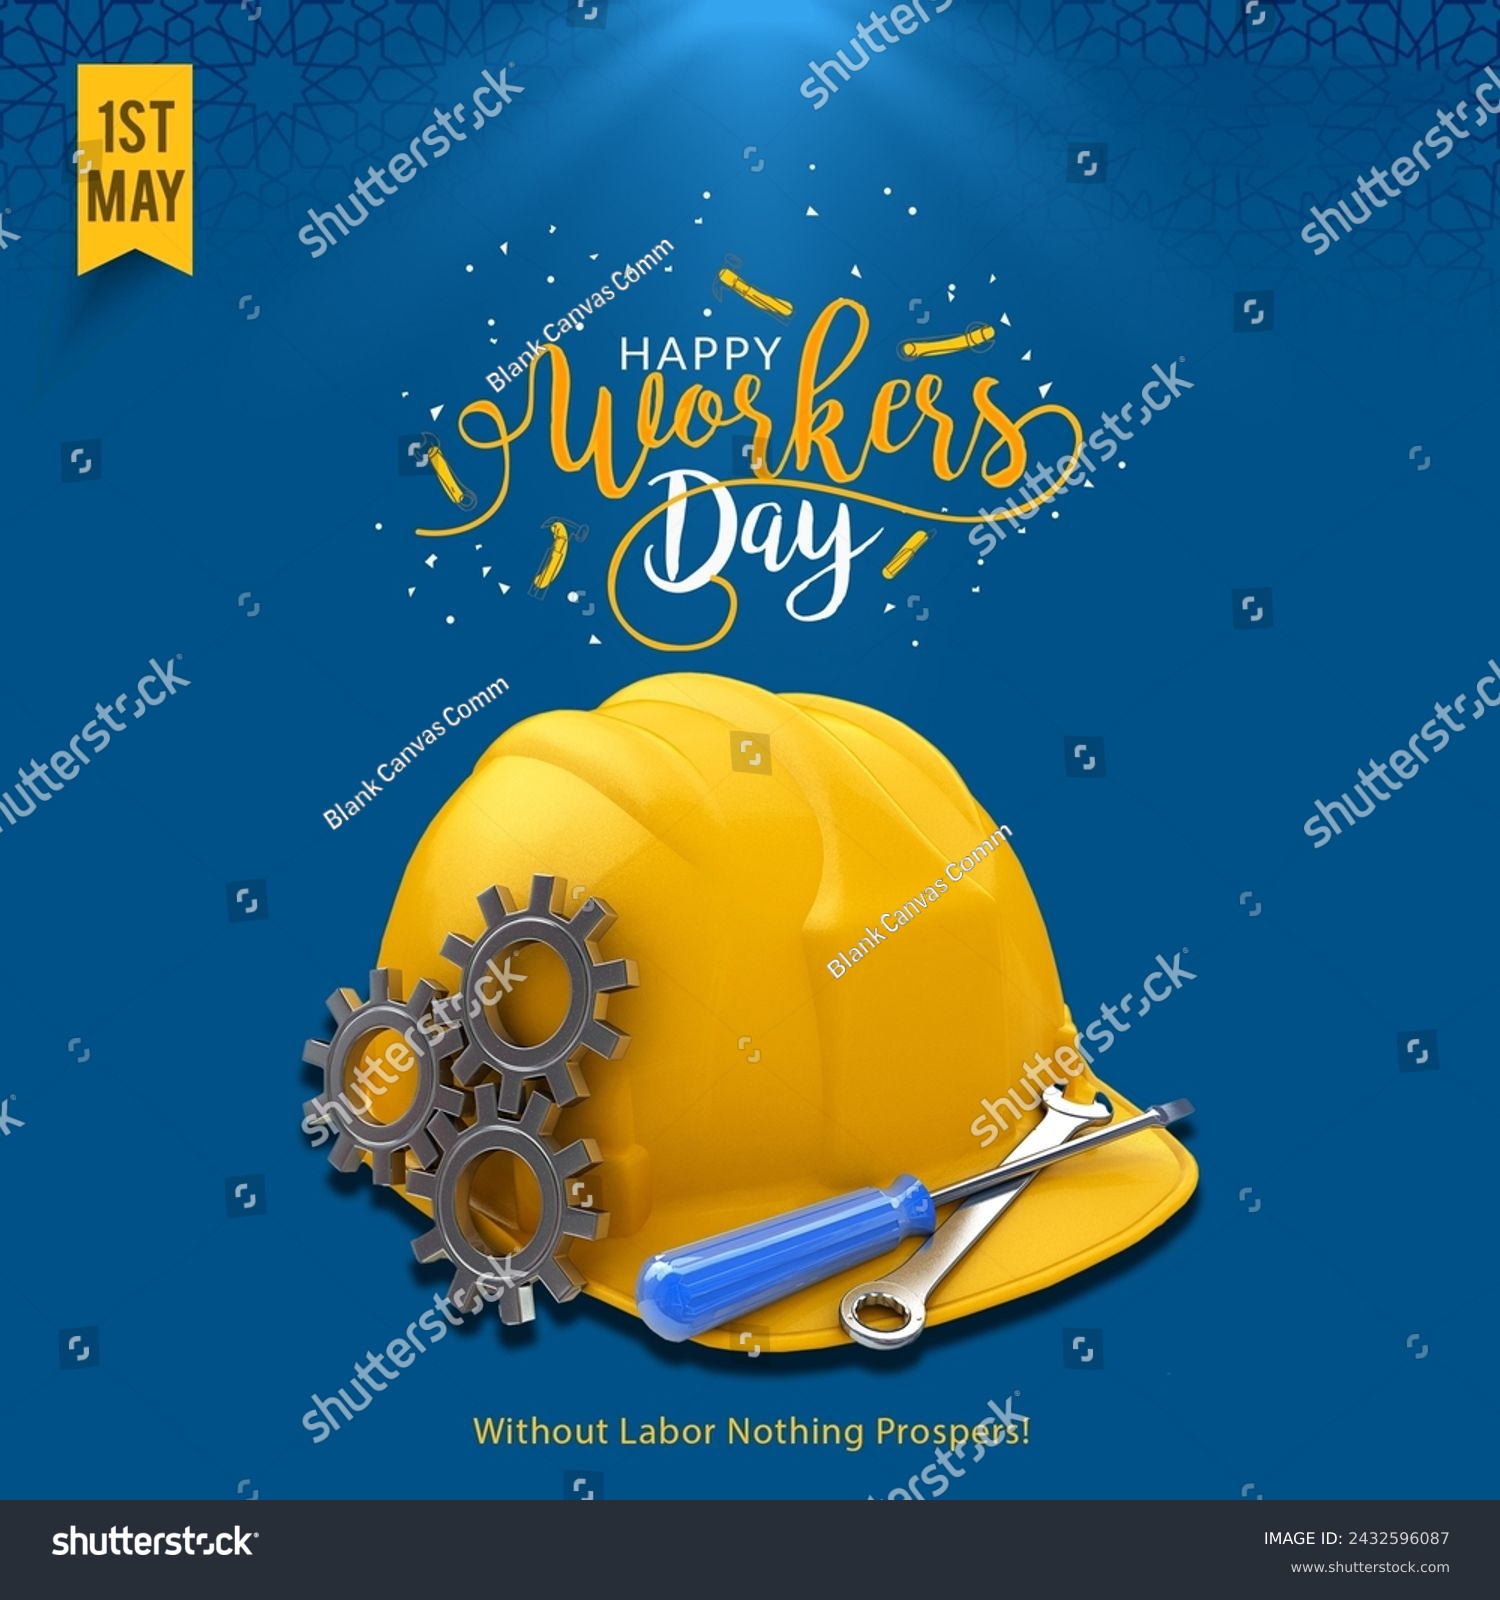 Happy Labor Day banner. Yellow Helmet, Construction Tools, 1st May #2432596087